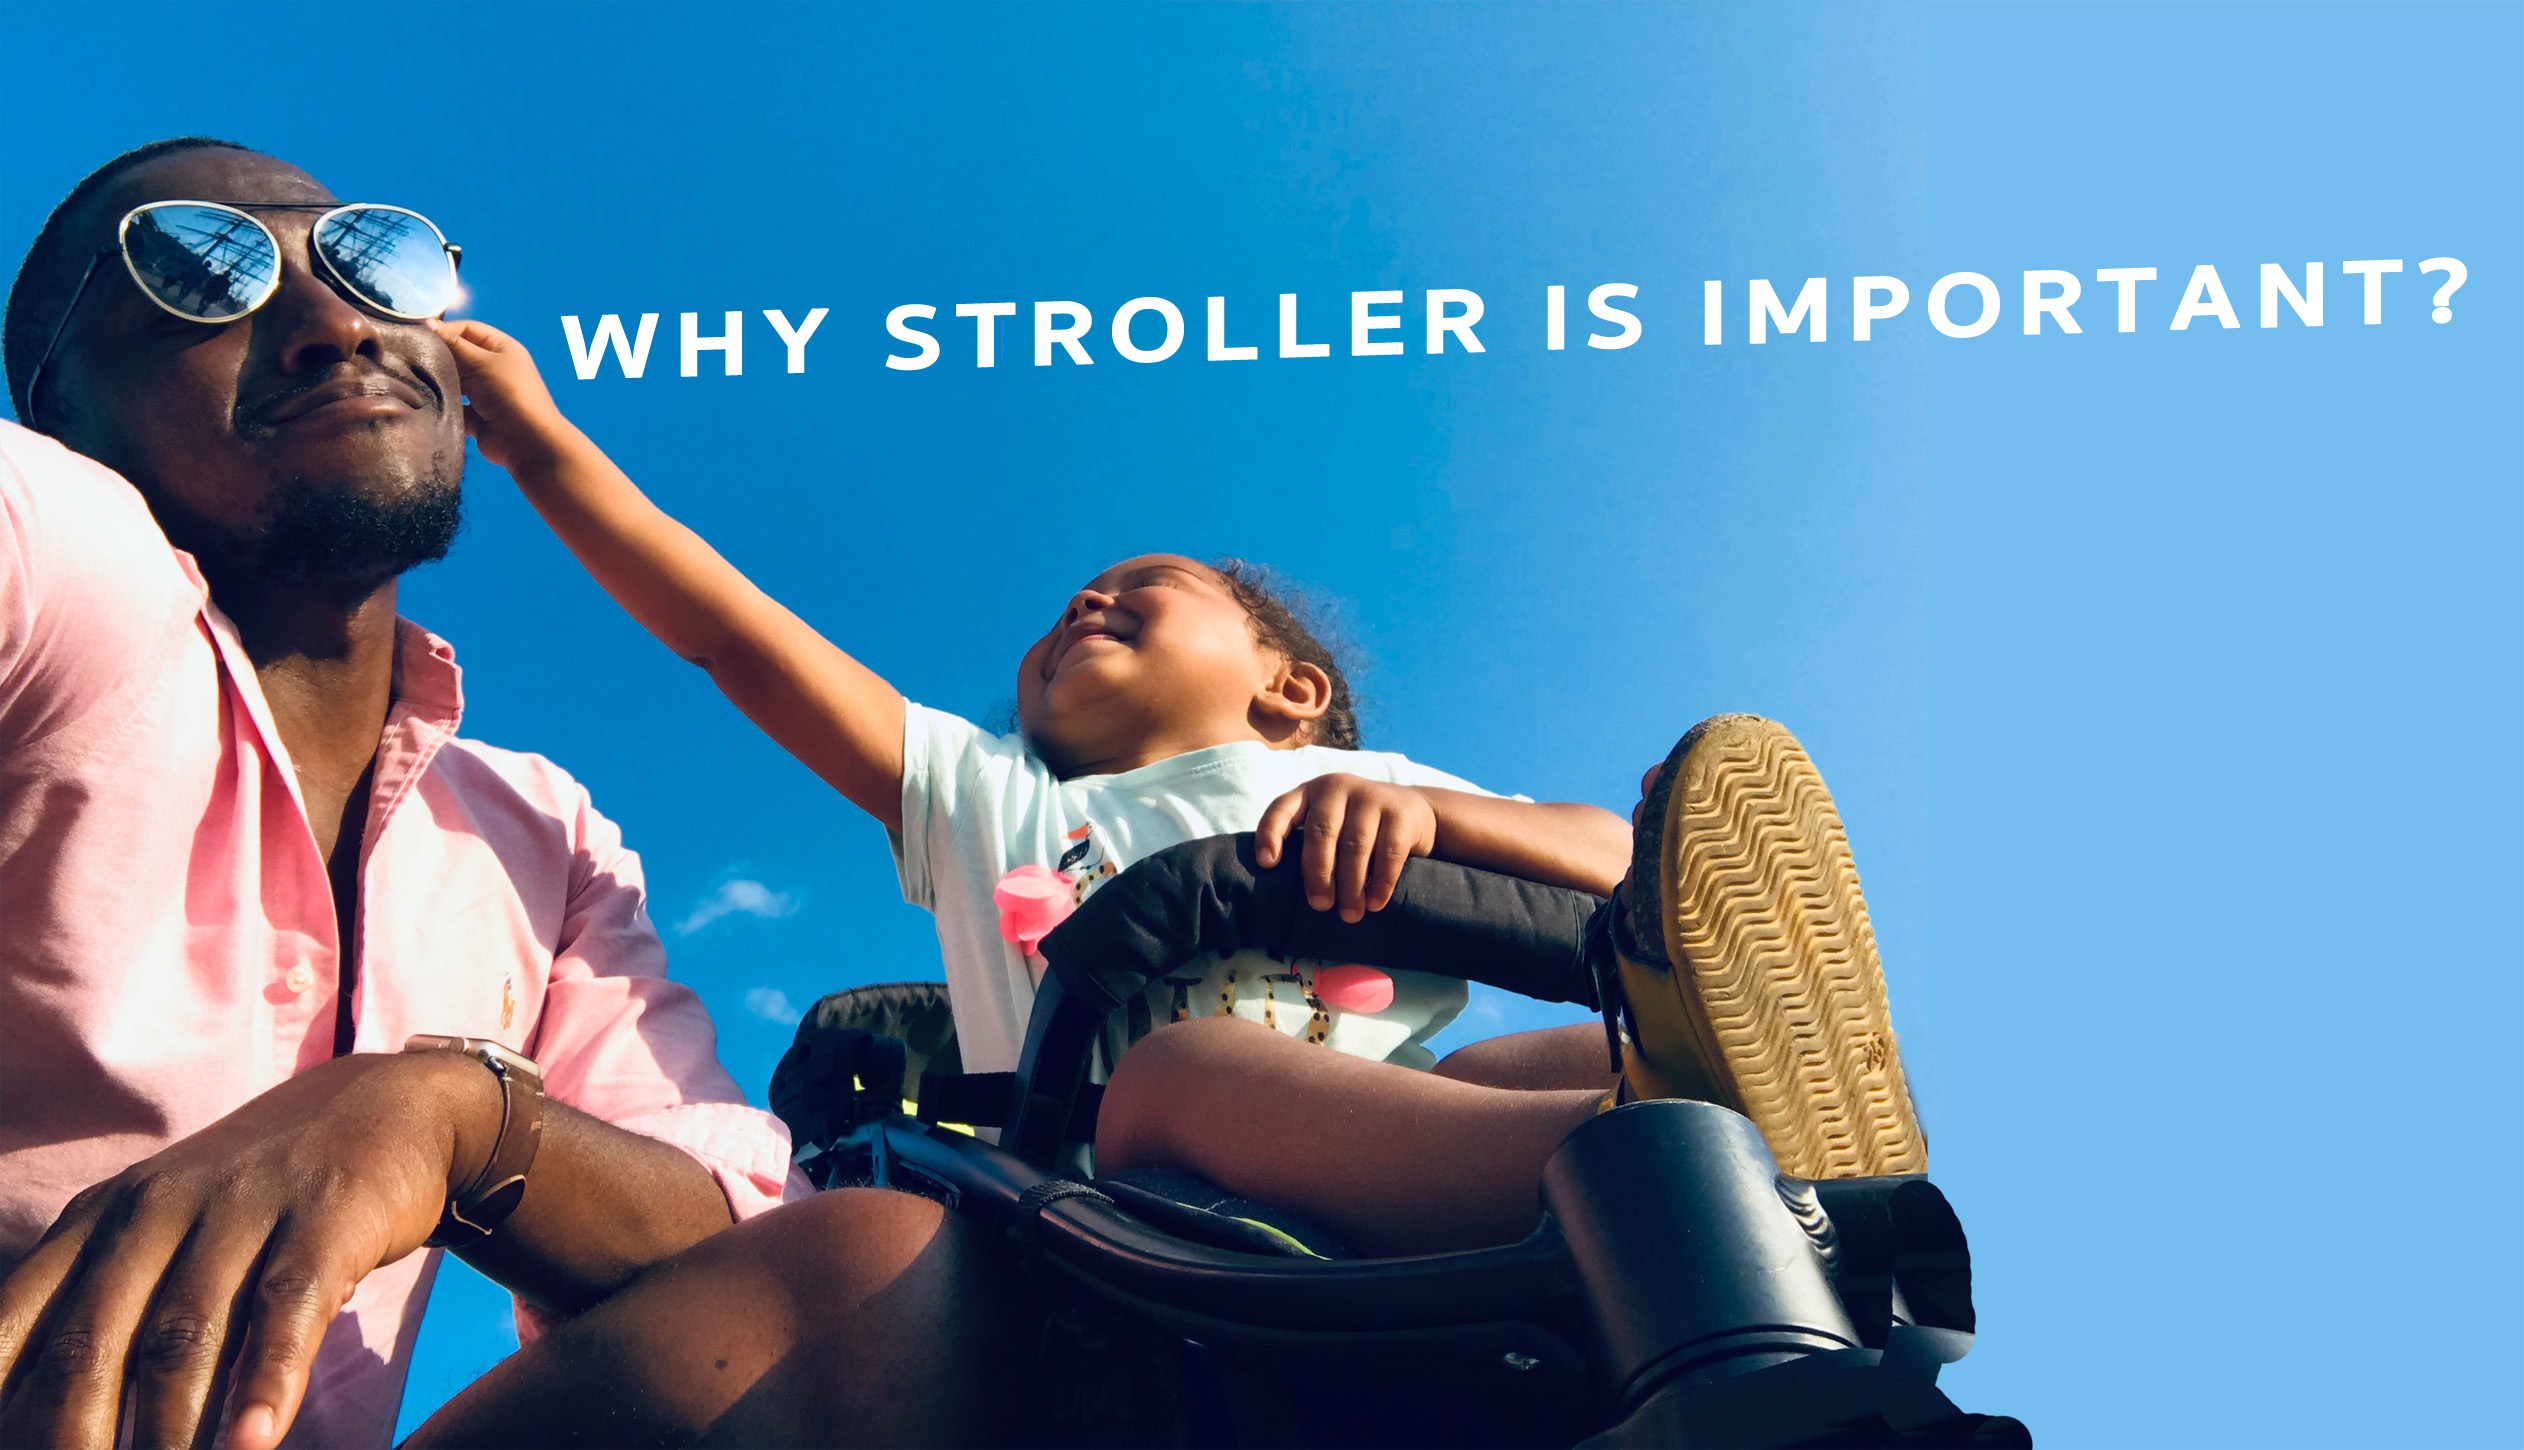 Why stroller is important